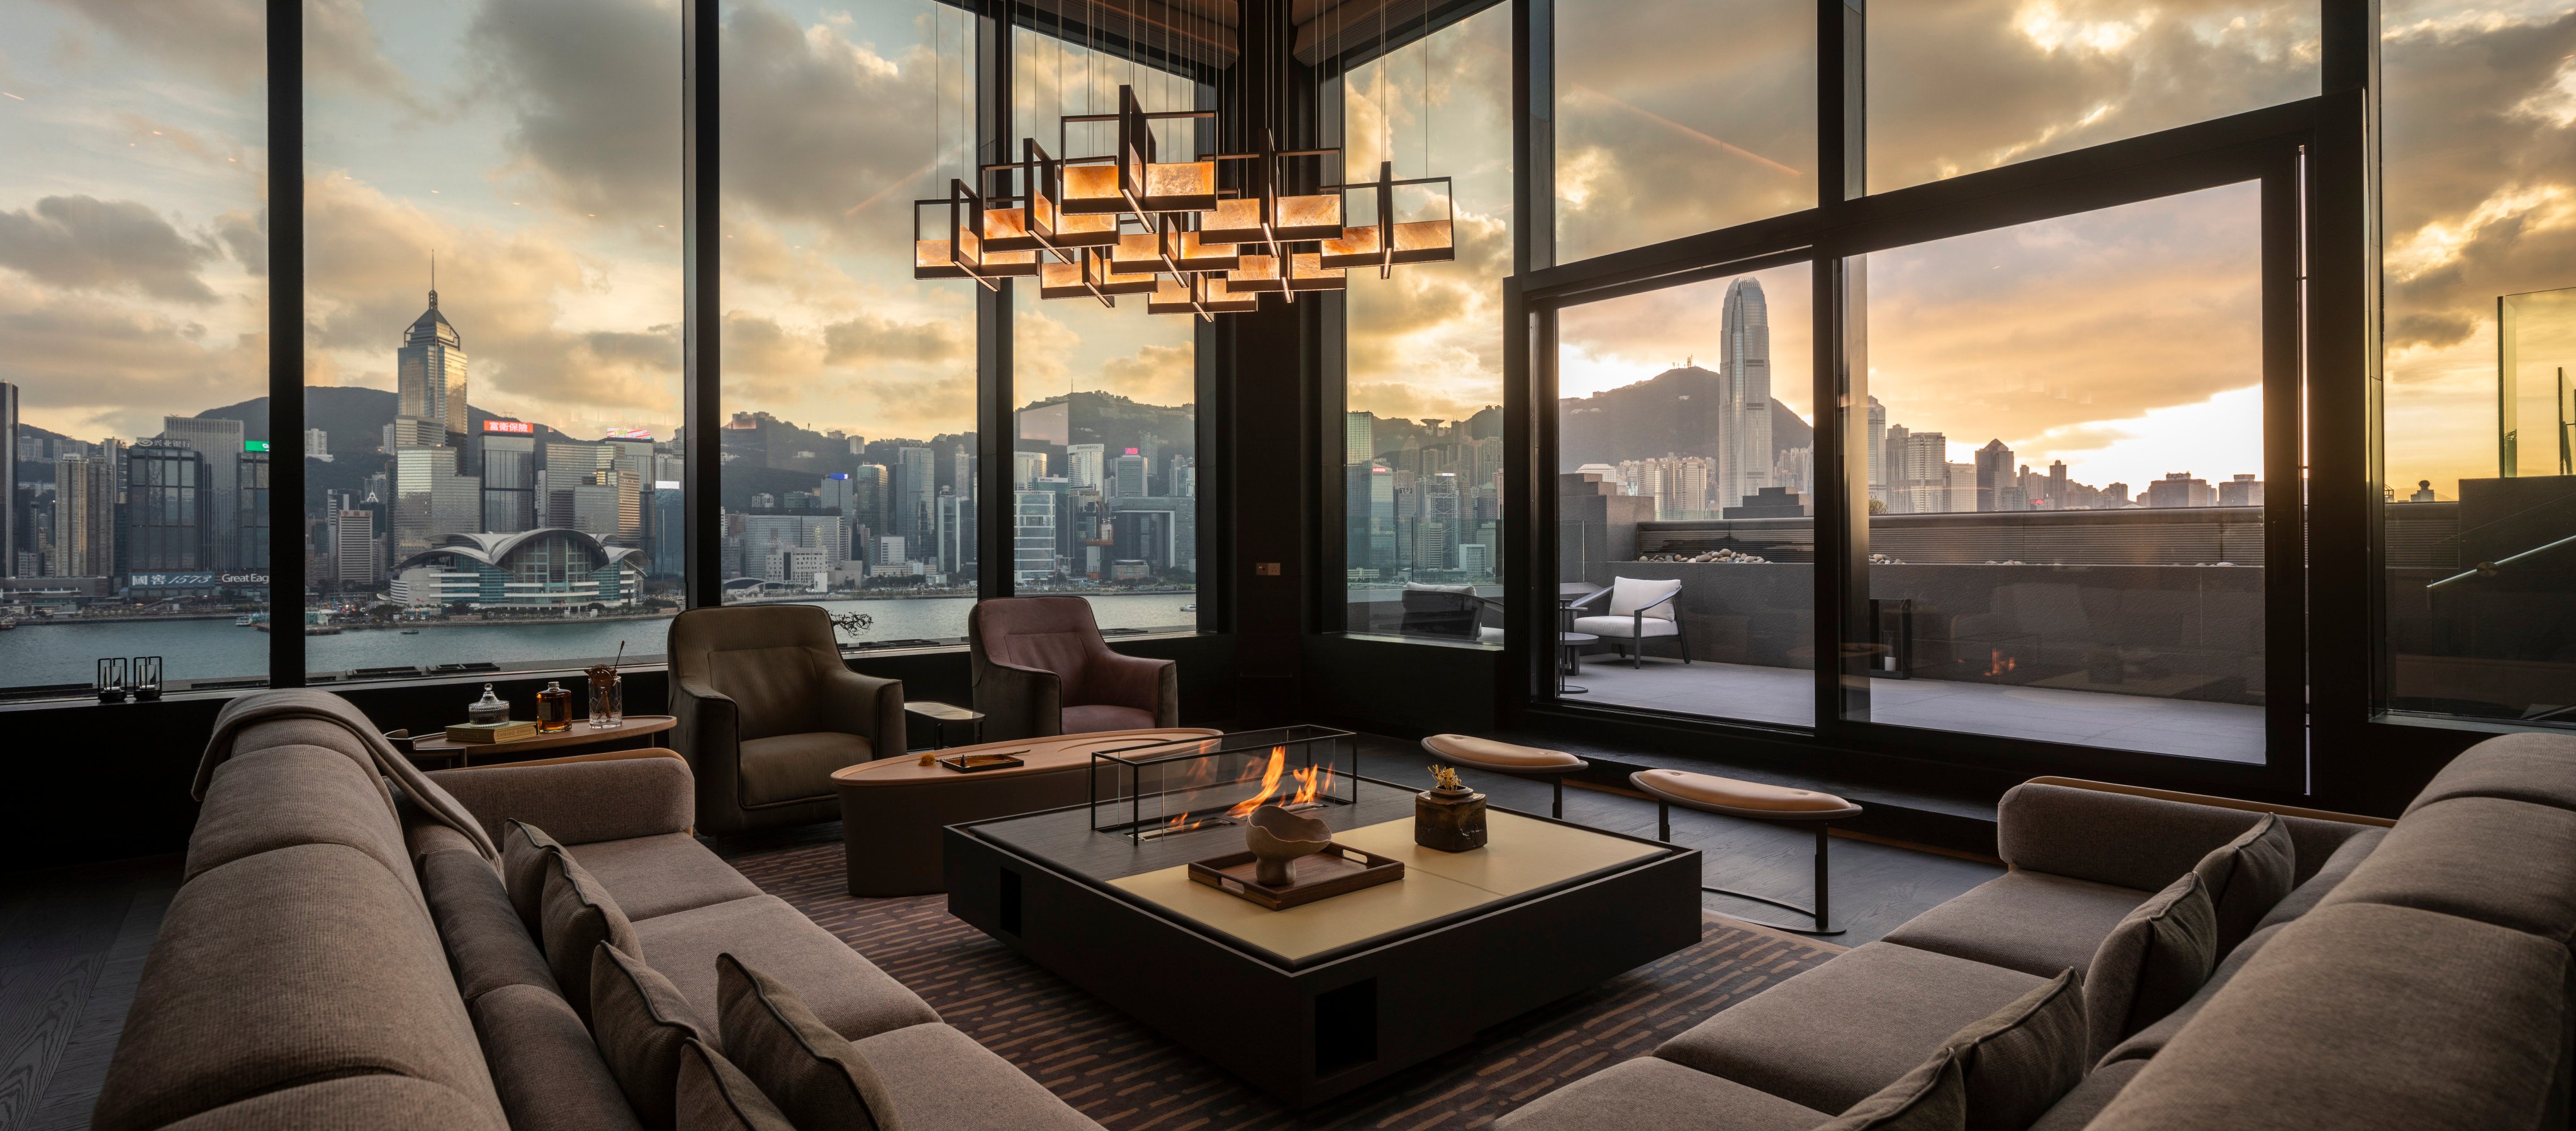 Regent Hong Kong boasts views of the city’s famous skyline, and has now added a trio of one-of-a kind personal havens, the Signature Suite Collection